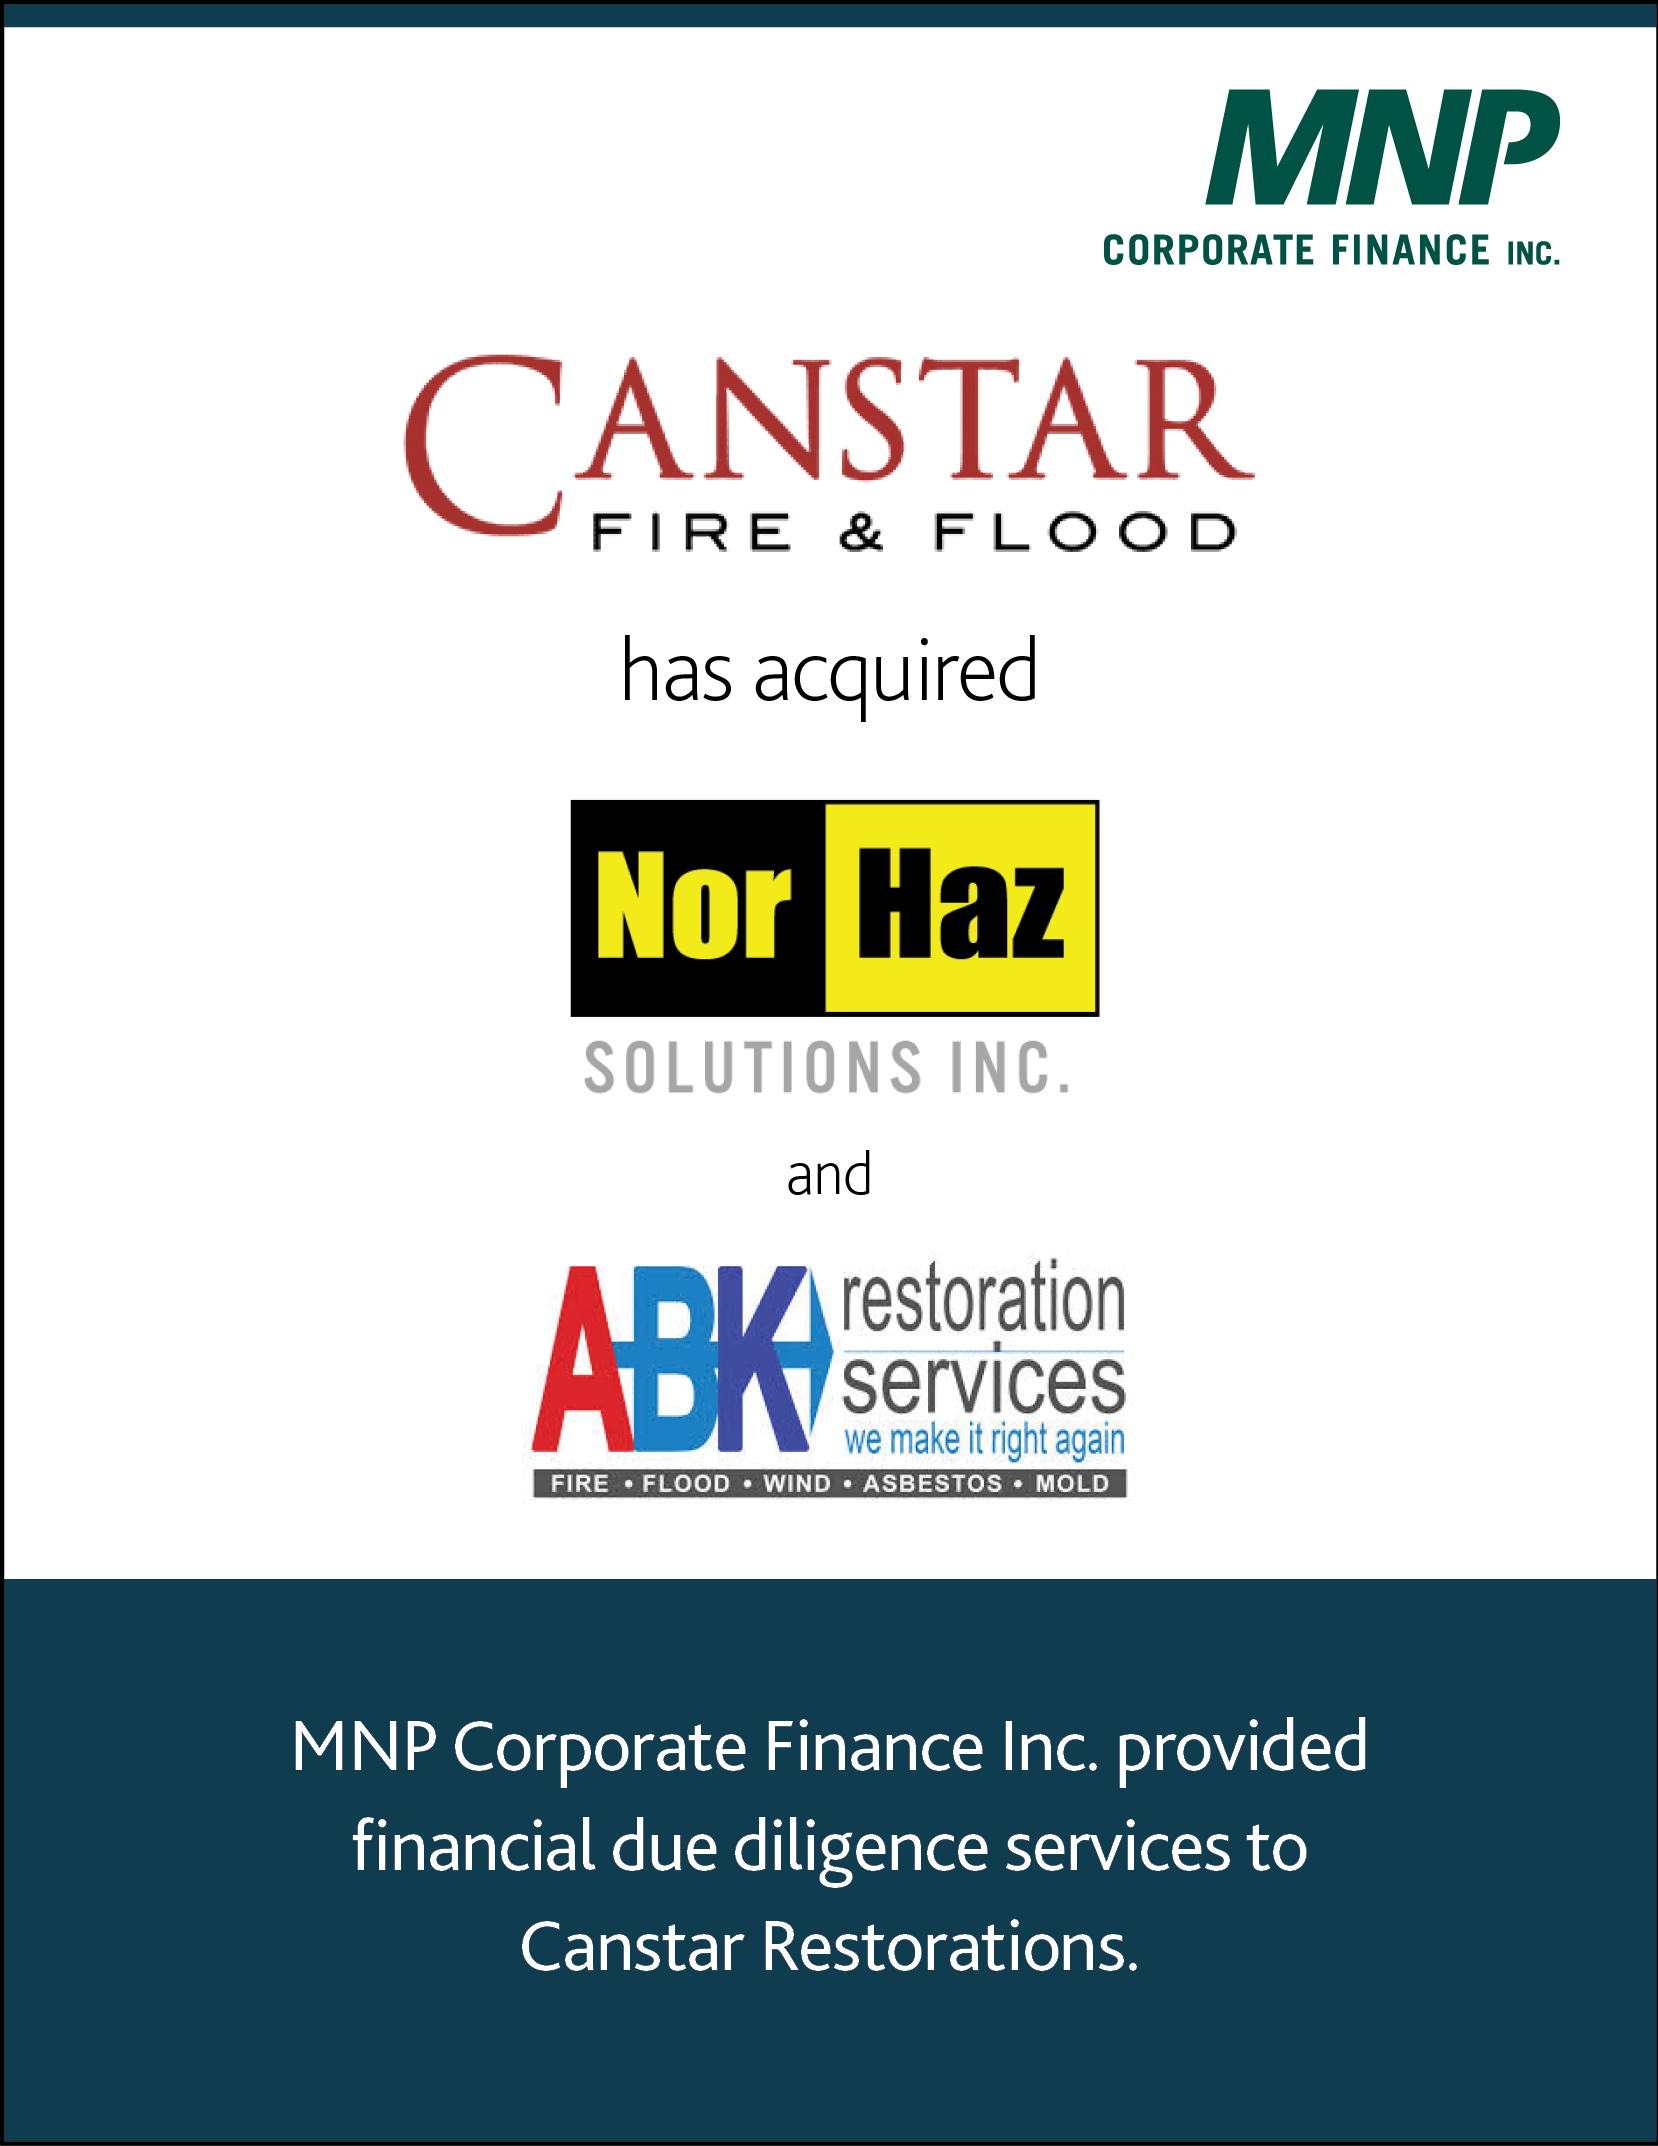 Canstar Fire & Flood has acquired Nor Haz Solutions INC and ABK Restoration Services